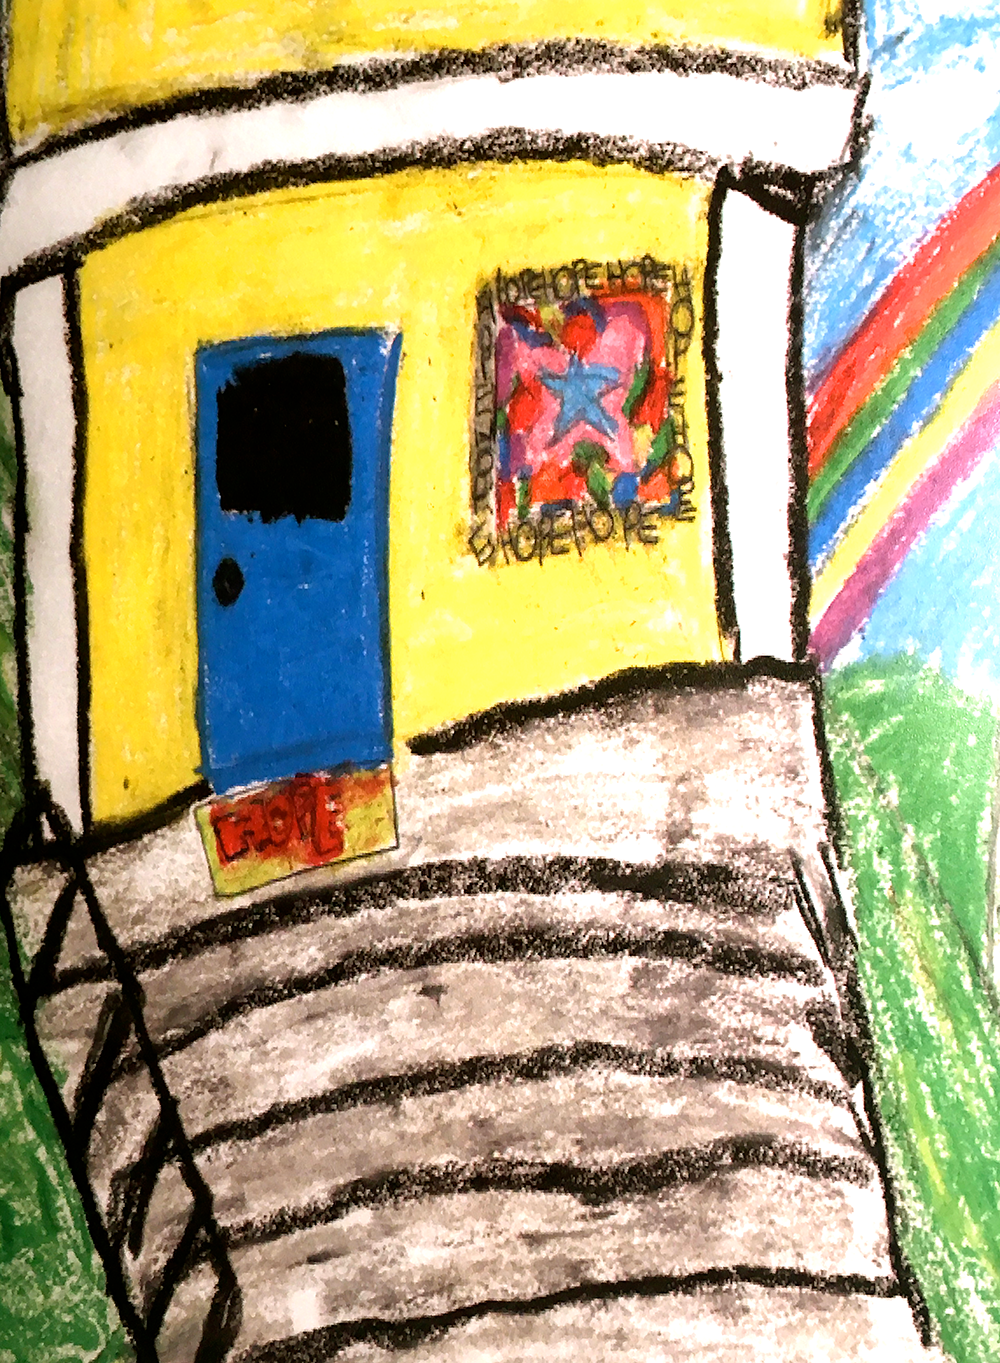 The Children's Room drawing